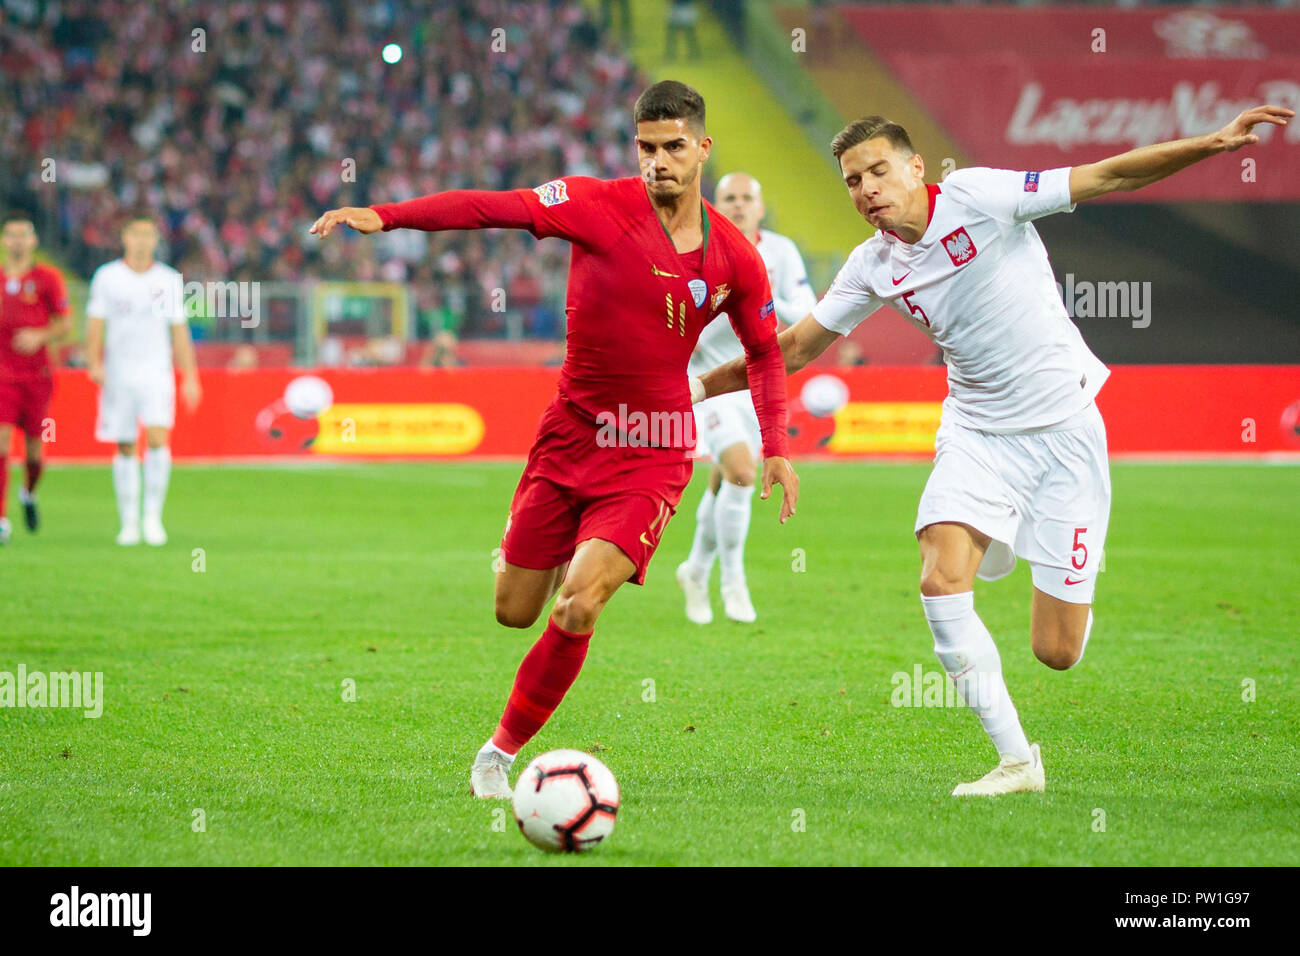 Portugal S Player Andre Silva In Action During The Match Between Poland And Portugal For The Uefa Nations League At Slaski Stadium In Chorzow Poland Final Score Poland 2 3 Portugal Stock Photo Alamy